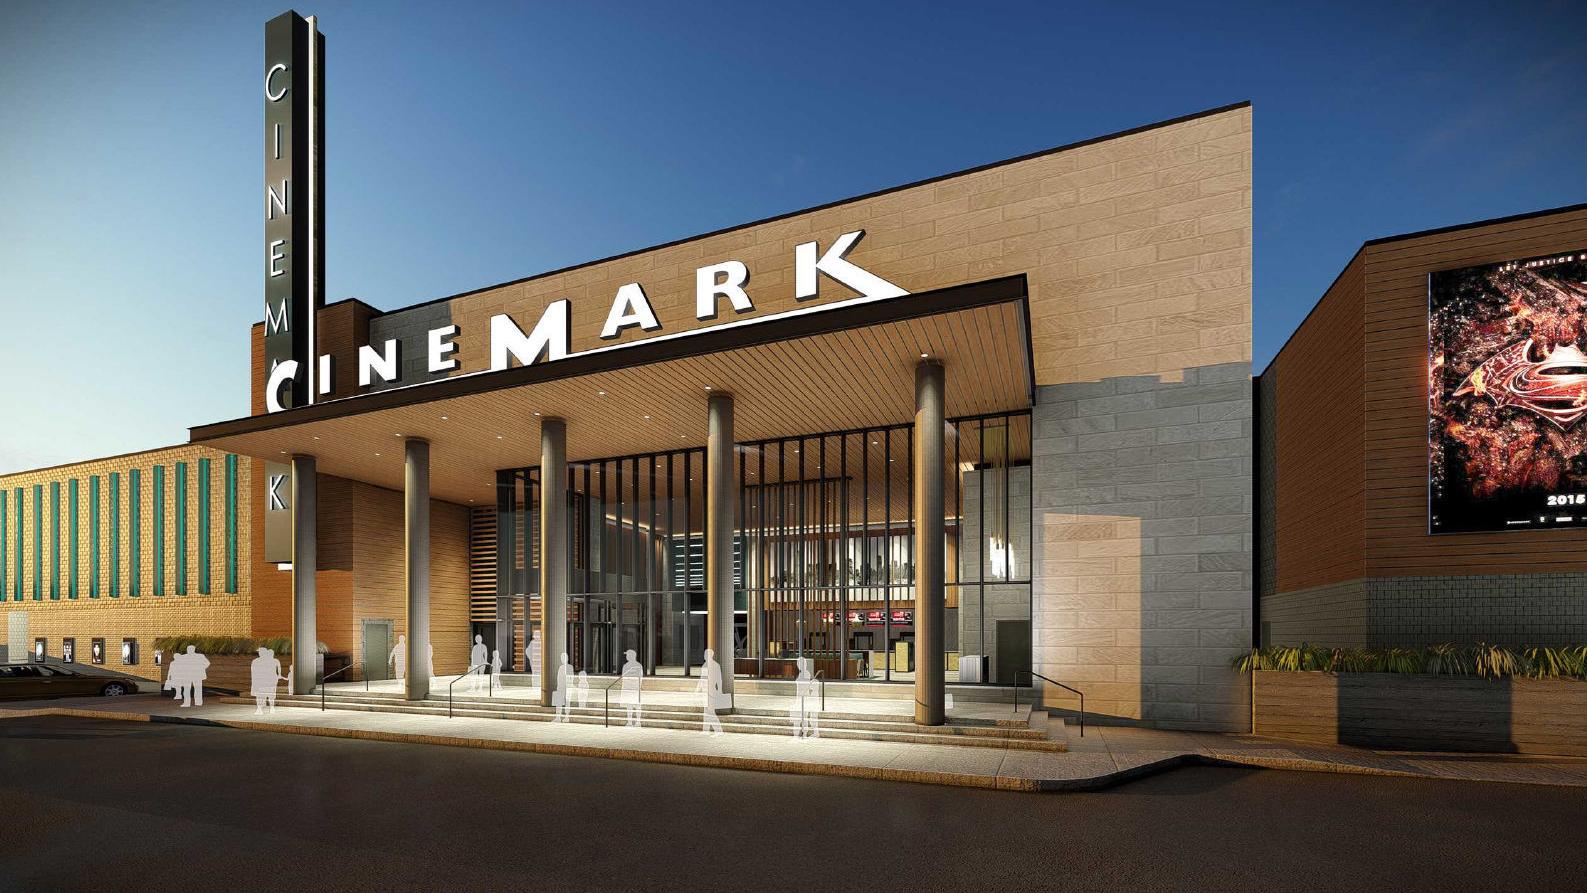 Cinemark Confirms Plans To Build 14-screen Theater In Waco Business News Wacotribcom